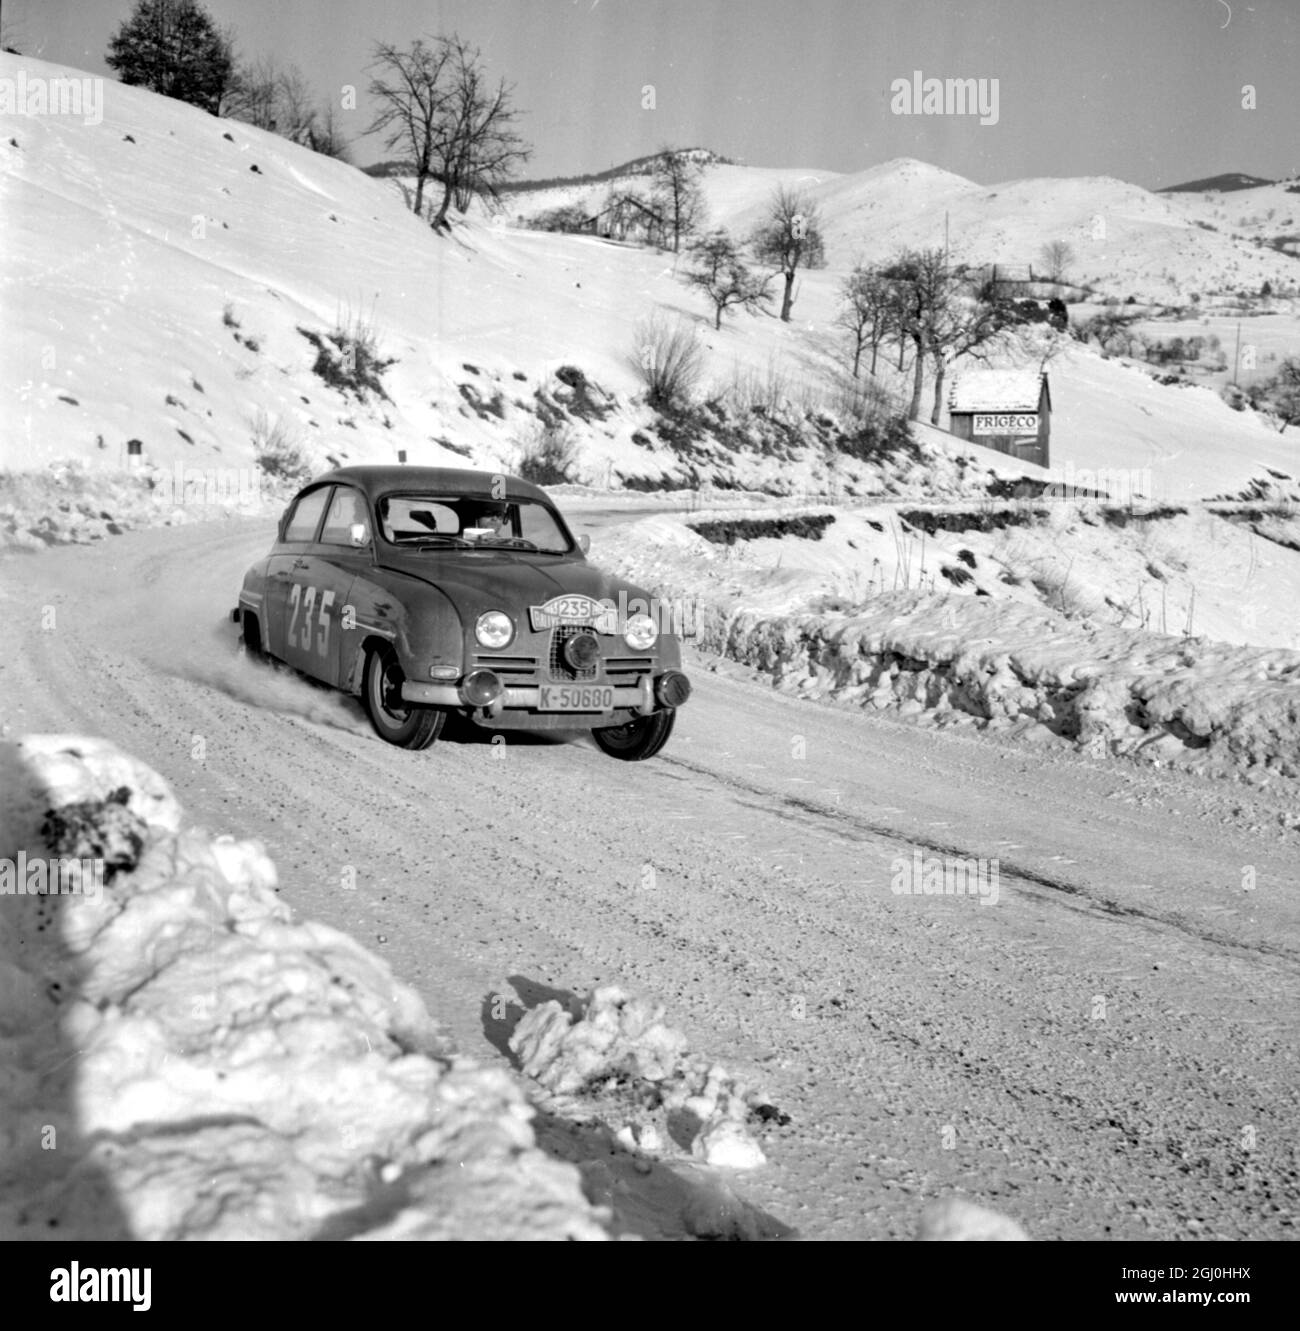 Gerardmer, France: Jens Jernes and Johan Solem, of Norway, pictured in a Saab (No 235) at the Col De La Schlwcht, near Gerardmer, France, during the last few hours of the four day Monte Carlo Rally. They had set out from Stockholm early on Saturday. 22 January 1963 Stock Photo